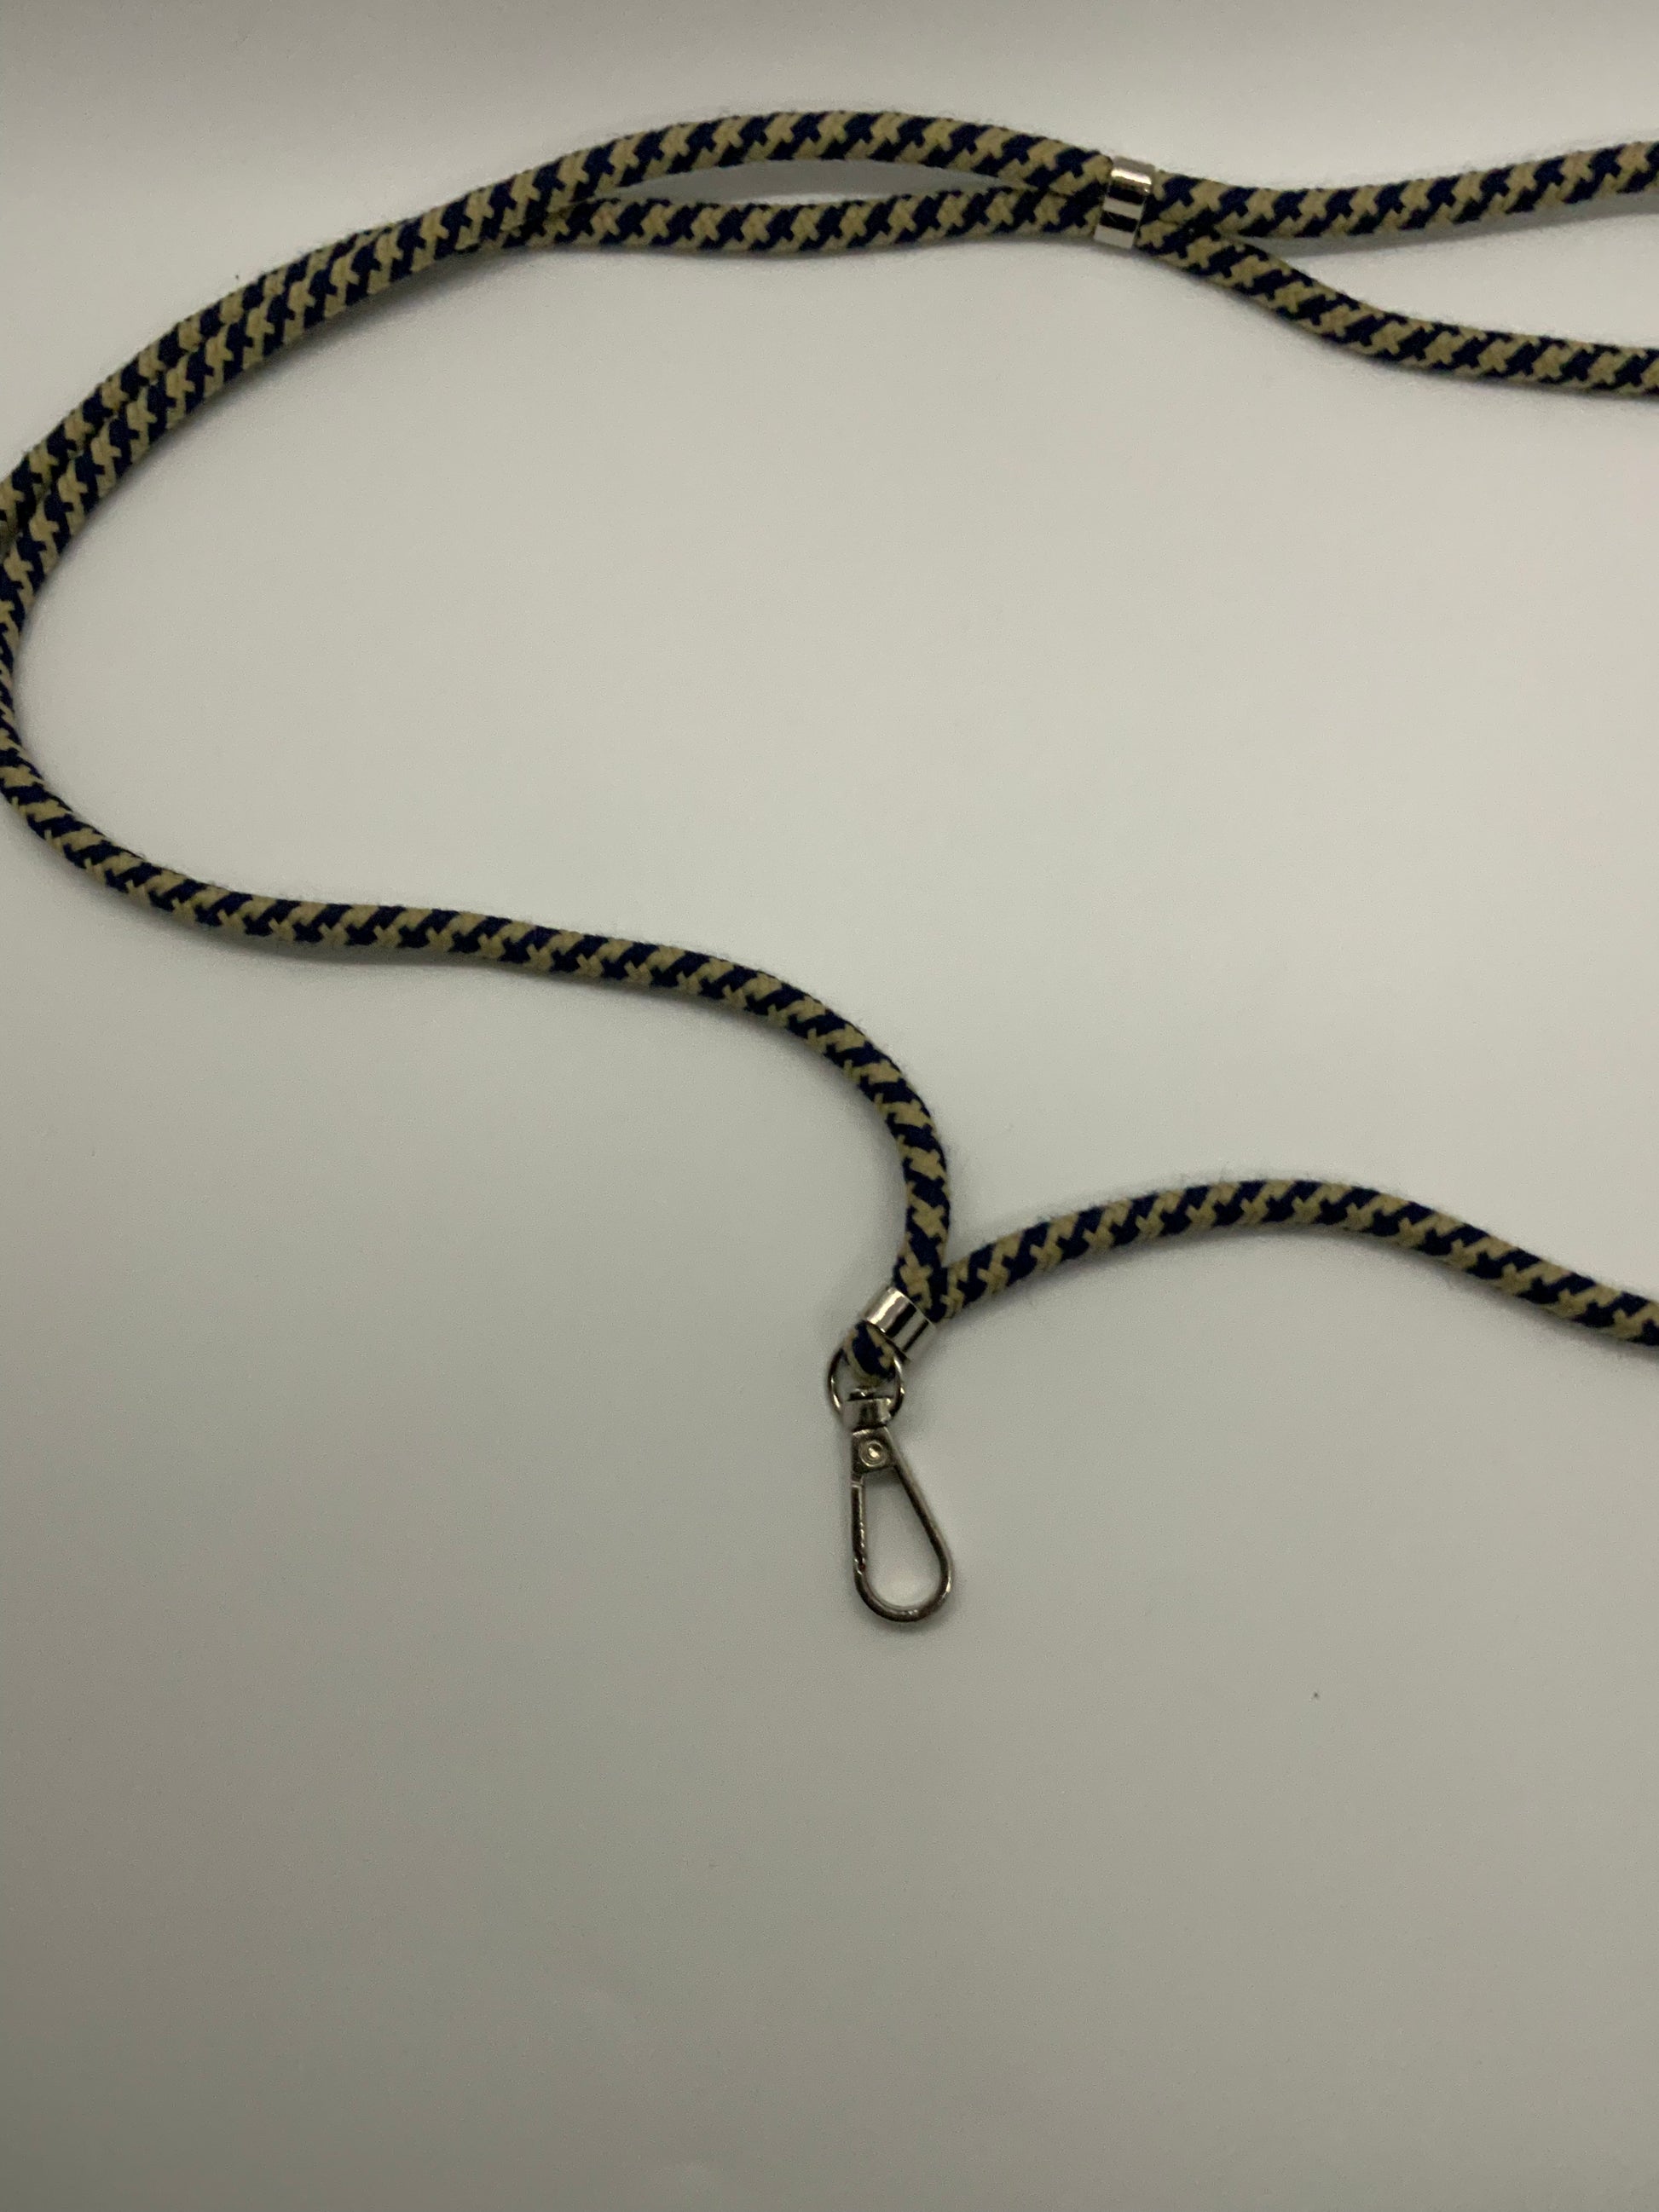 Be My AI: The picture shows a lanyard on a white background. The lanyard has a woven fabric strap with a zigzag pattern in black and yellow colors. At one end of the lanyard, there is a metal clasp that is silver in color. The clasp is shaped like a small carabiner, used to attach keys or an ID card. The lanyard also has a small metal piece that seems to be used for adjusting the length or position of the strap.